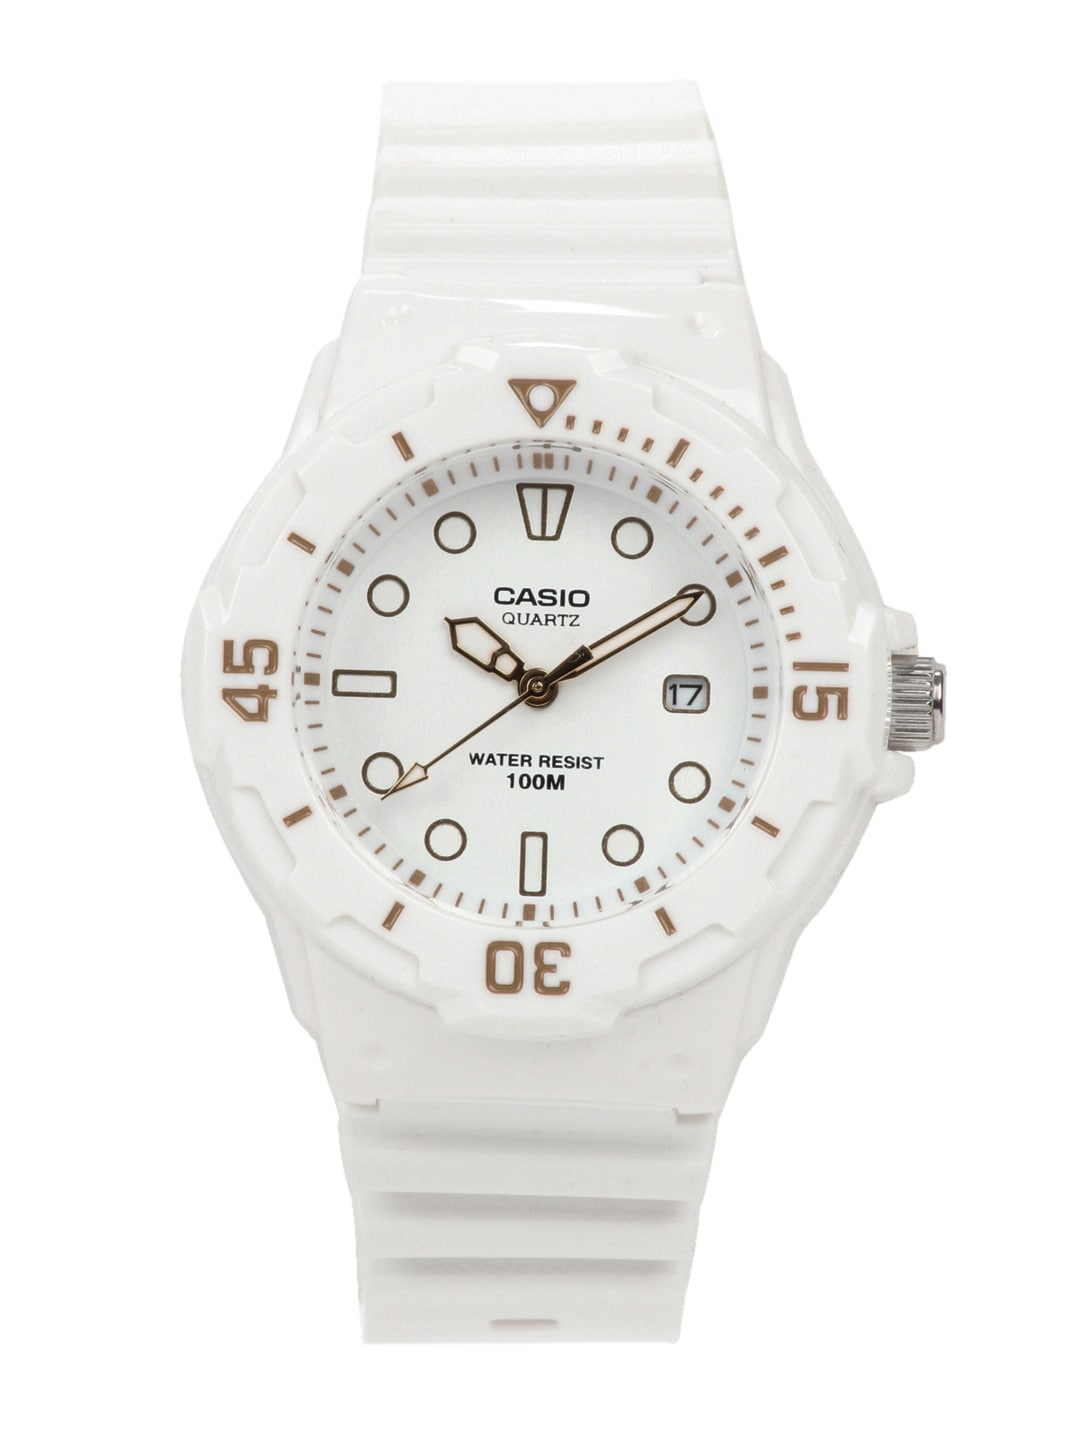 CASIO ENTICER Women White Dial Analogue Watch A626